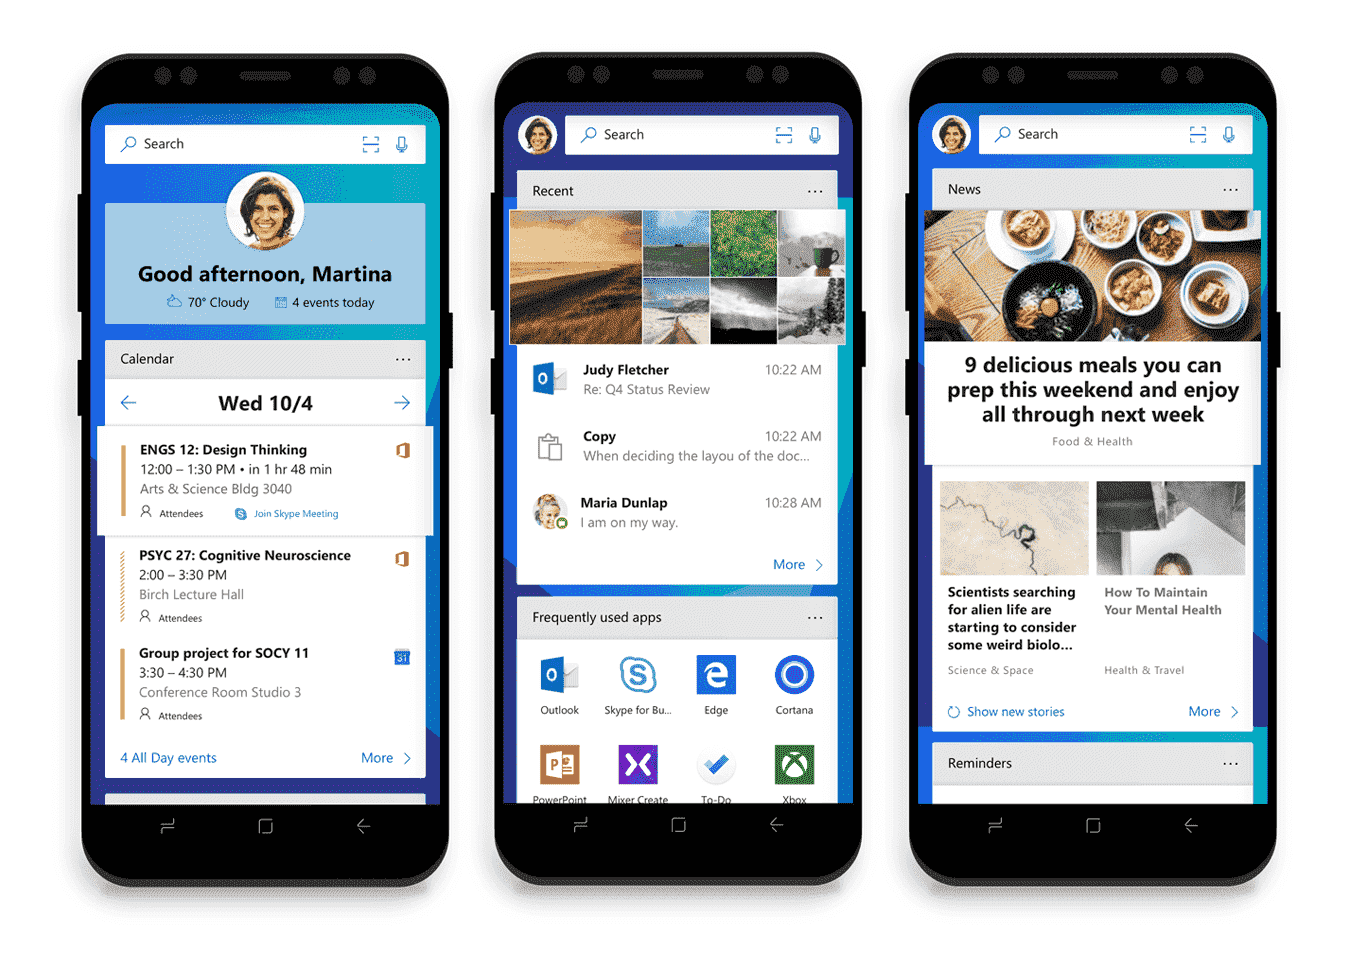 Microsoft Launcher’s new update brings Windows 10 Timeline to phones 8268874d2e645d4bb0948d74441562cd.png